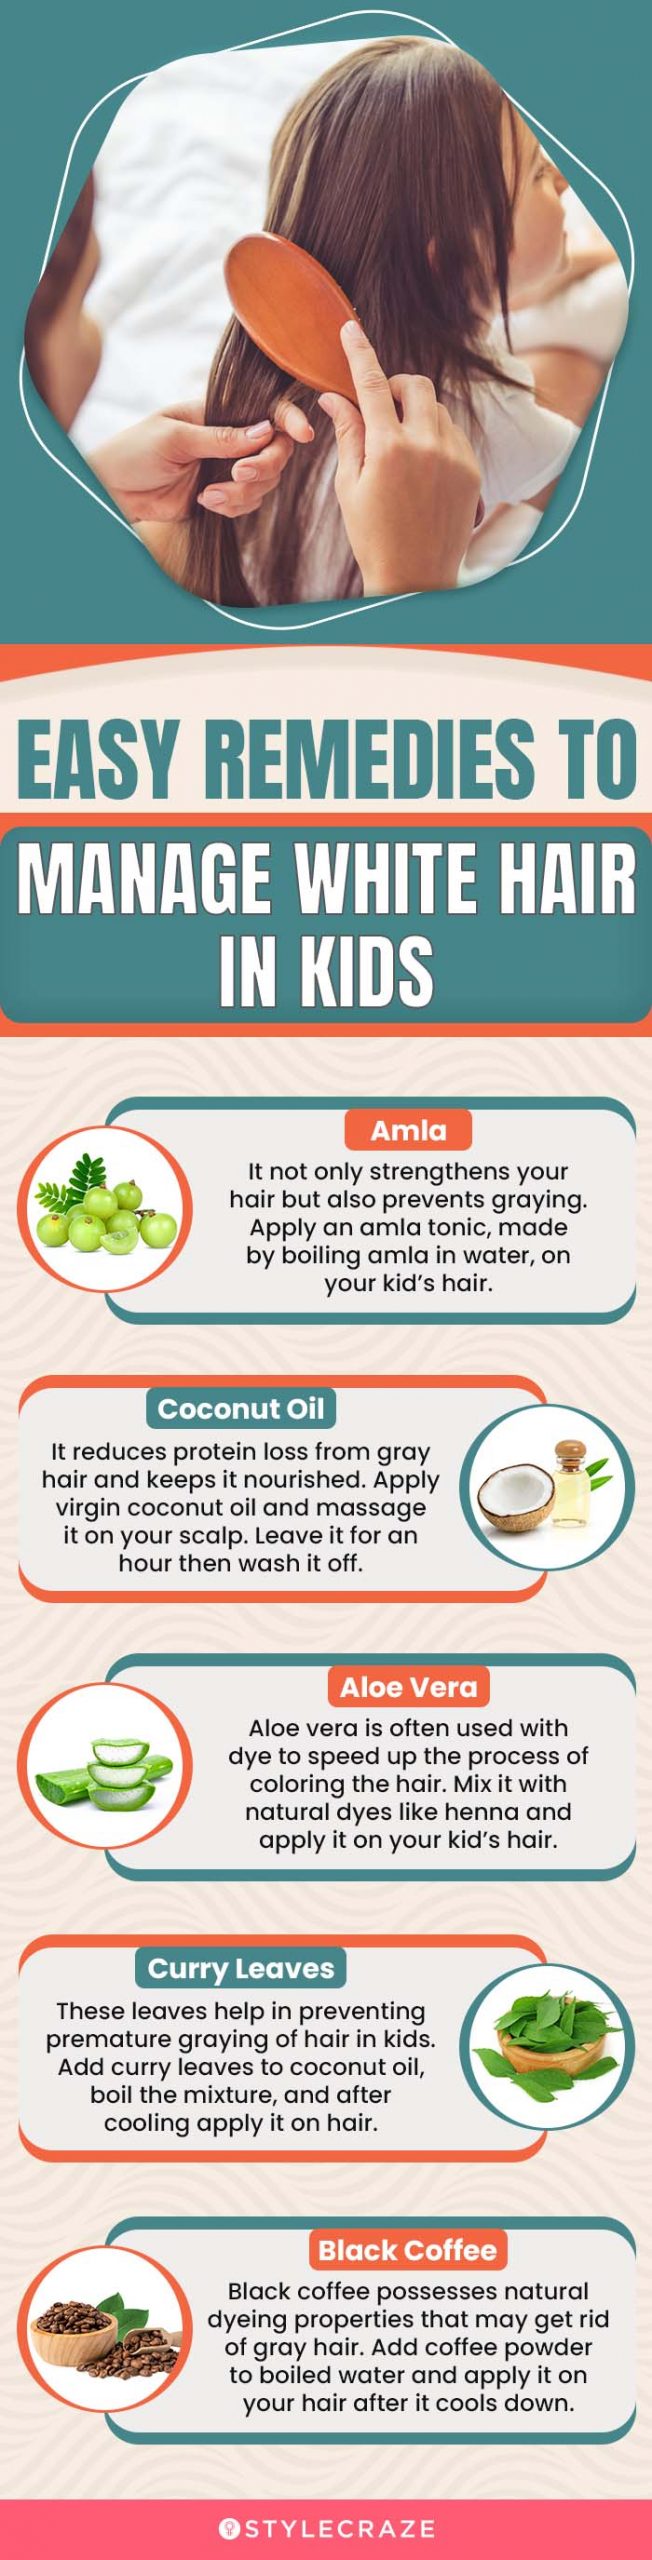 easy remedies to manage white hair in kids [infographic]